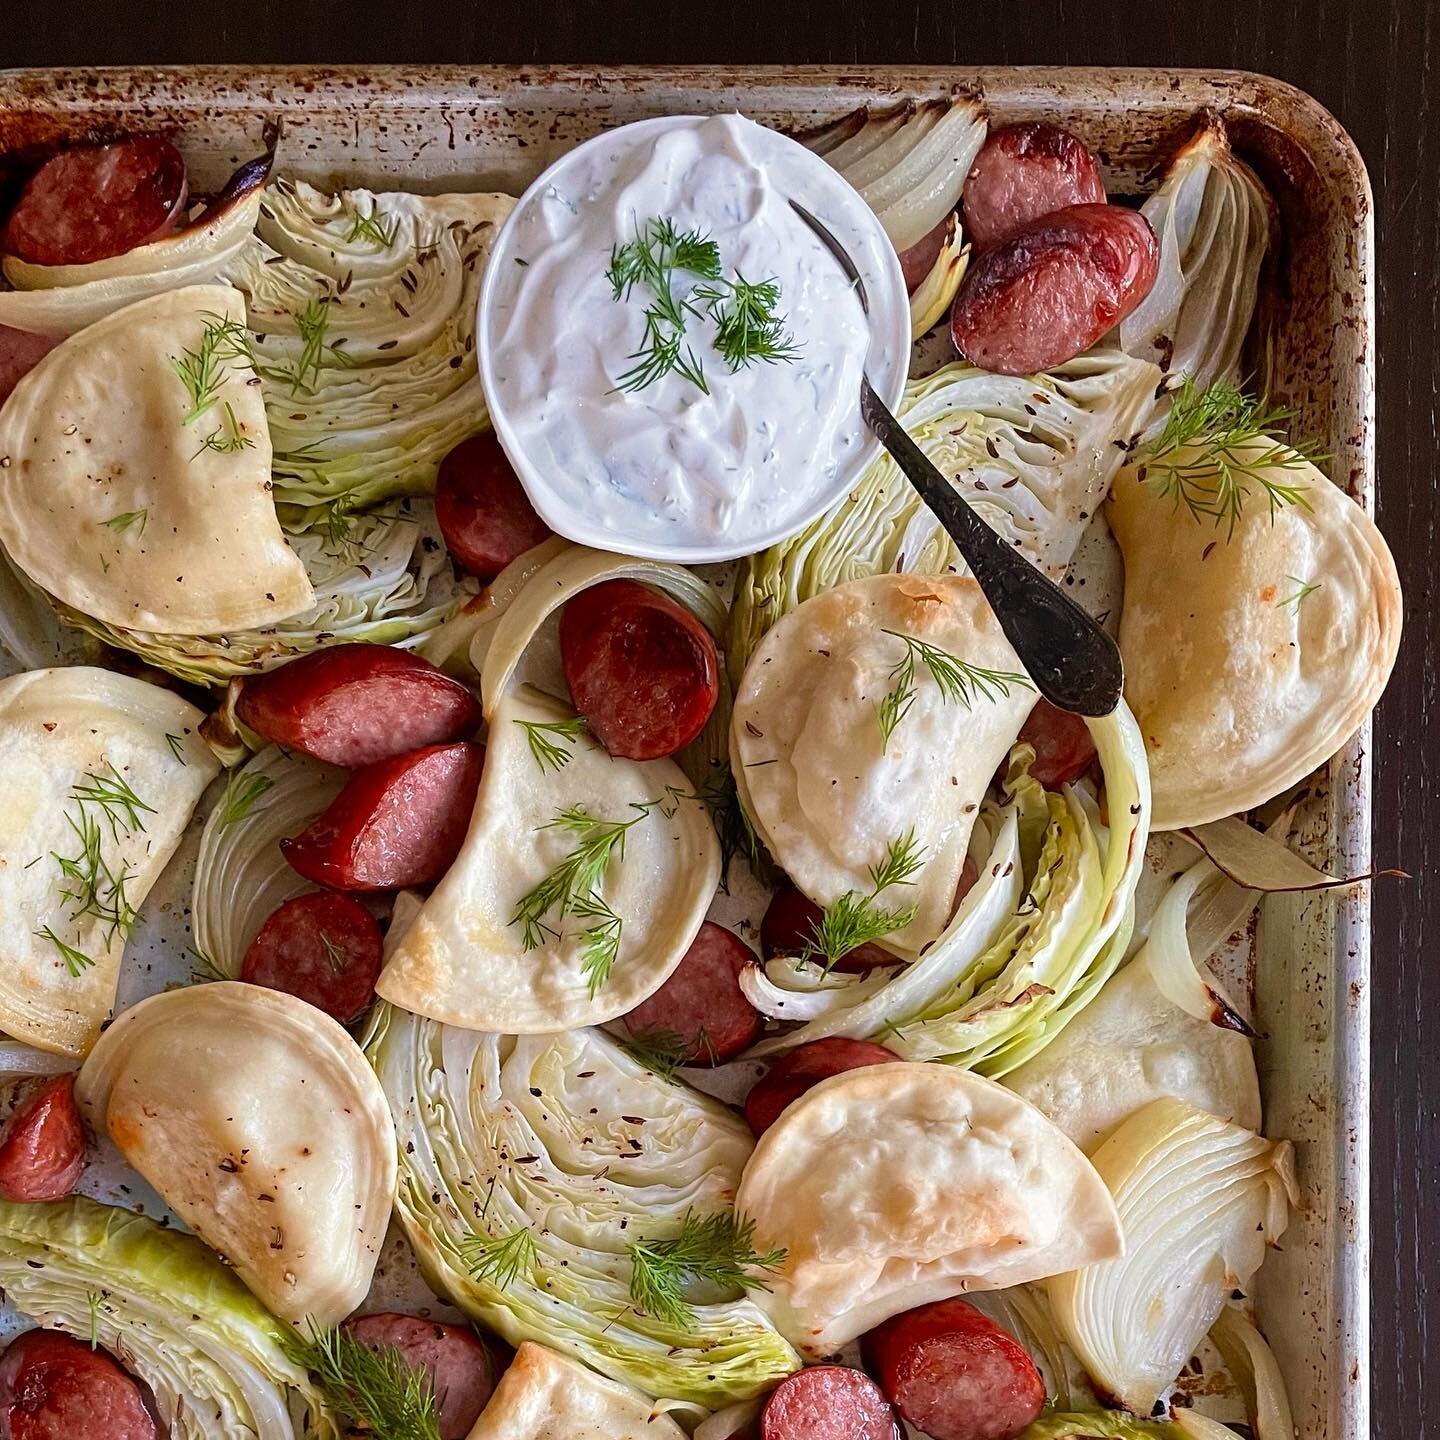 Here in NJ, it&rsquo;s that in between season &mdash; you know, the one where you wear that lightweight jacket you paid too much for only twice. 🤷🏼&zwj;♀️

This sheet pan meal is perfect for crisp days. Bonus: It&rsquo;s so easy to put together, yo